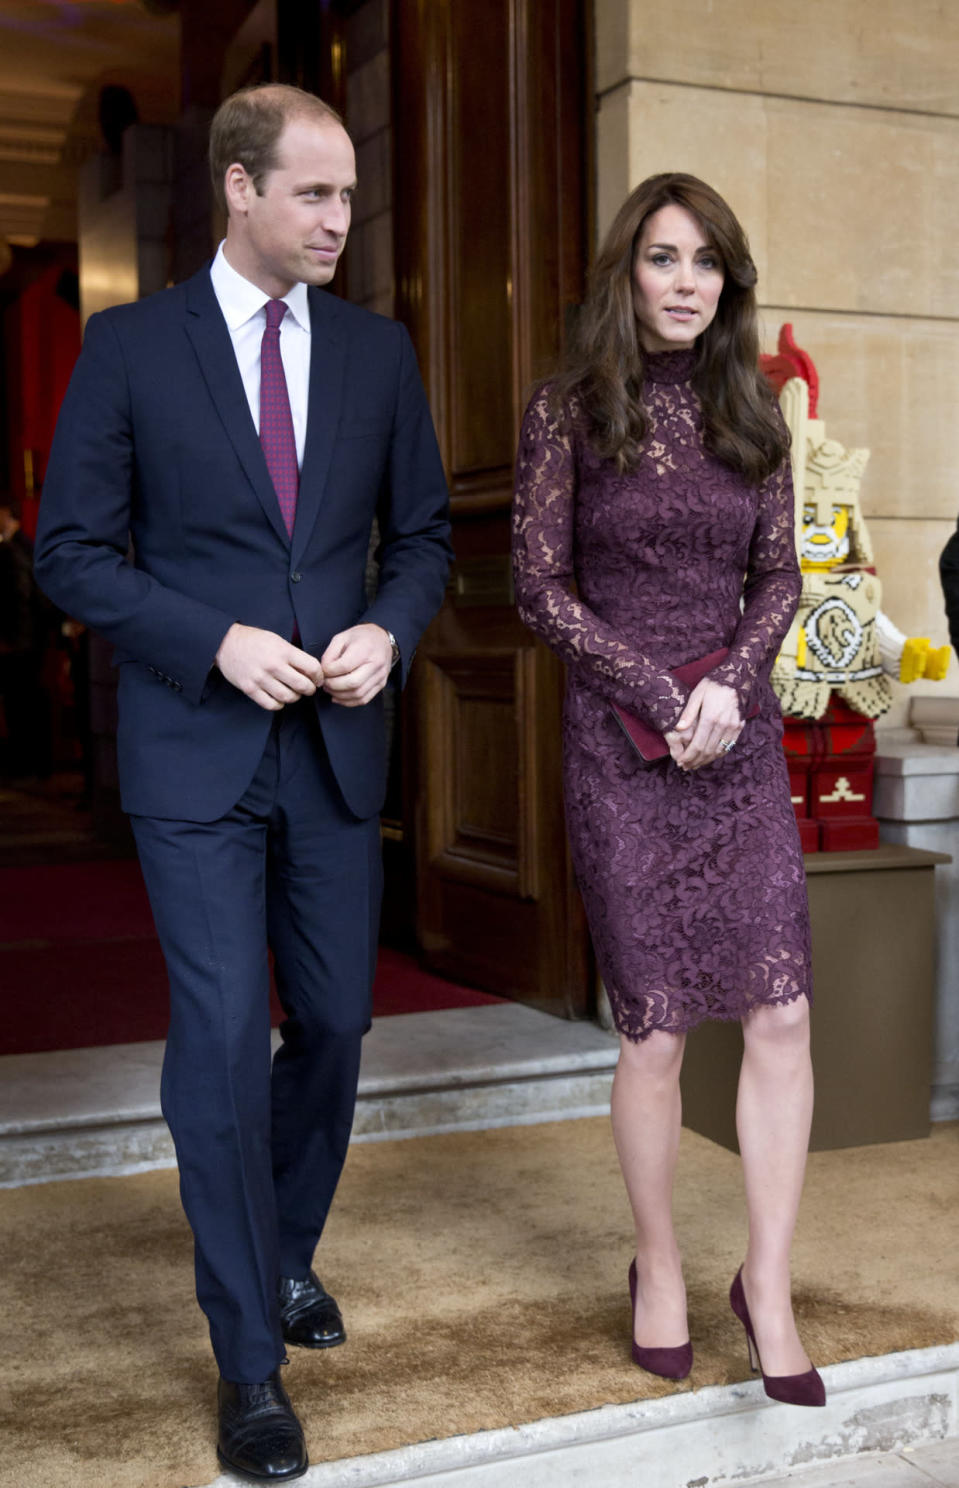 <p>Kate met the President of China in London in a lacy plum dress designed by Dolce & Gabbana. She teamed the look with matching Gianvito Rossi heels and a red Mulberry clutch.</p><p><i>[Photo: PA]</i></p>